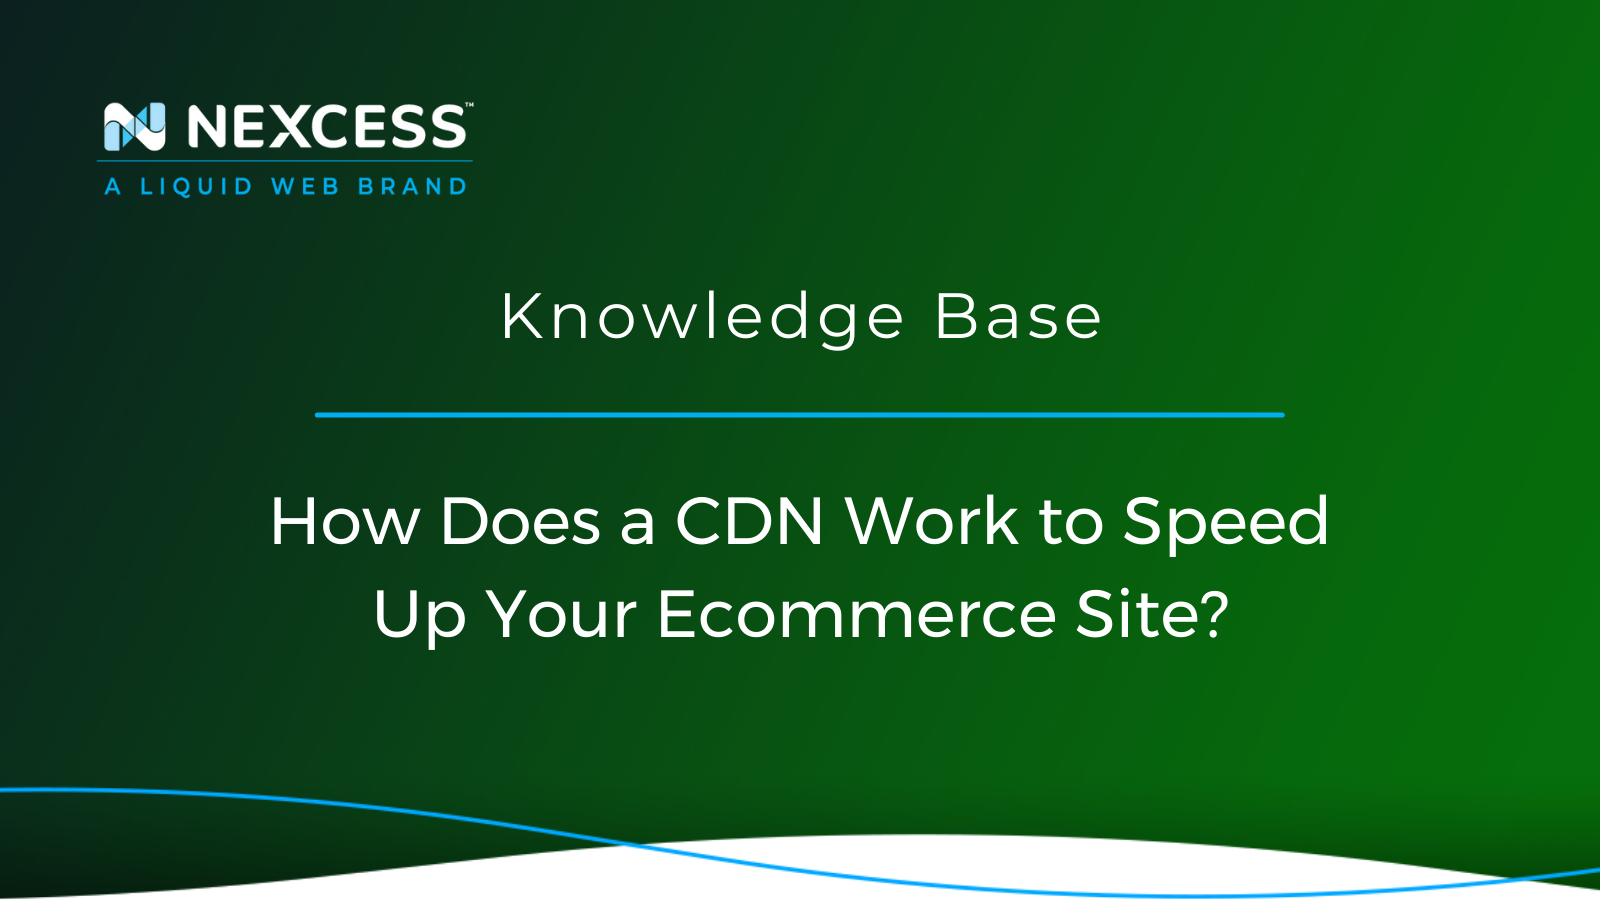 How Does a CDN Work to Speed Up Your Ecommerce Site?